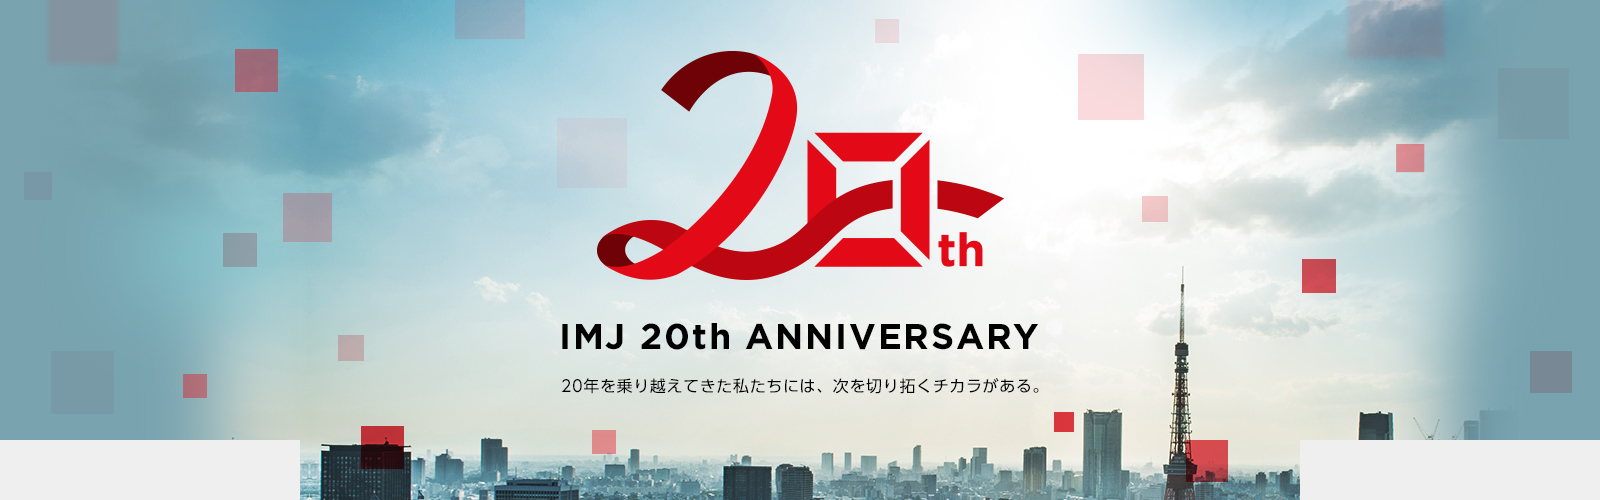 20th Anniversary IMJ GROUP